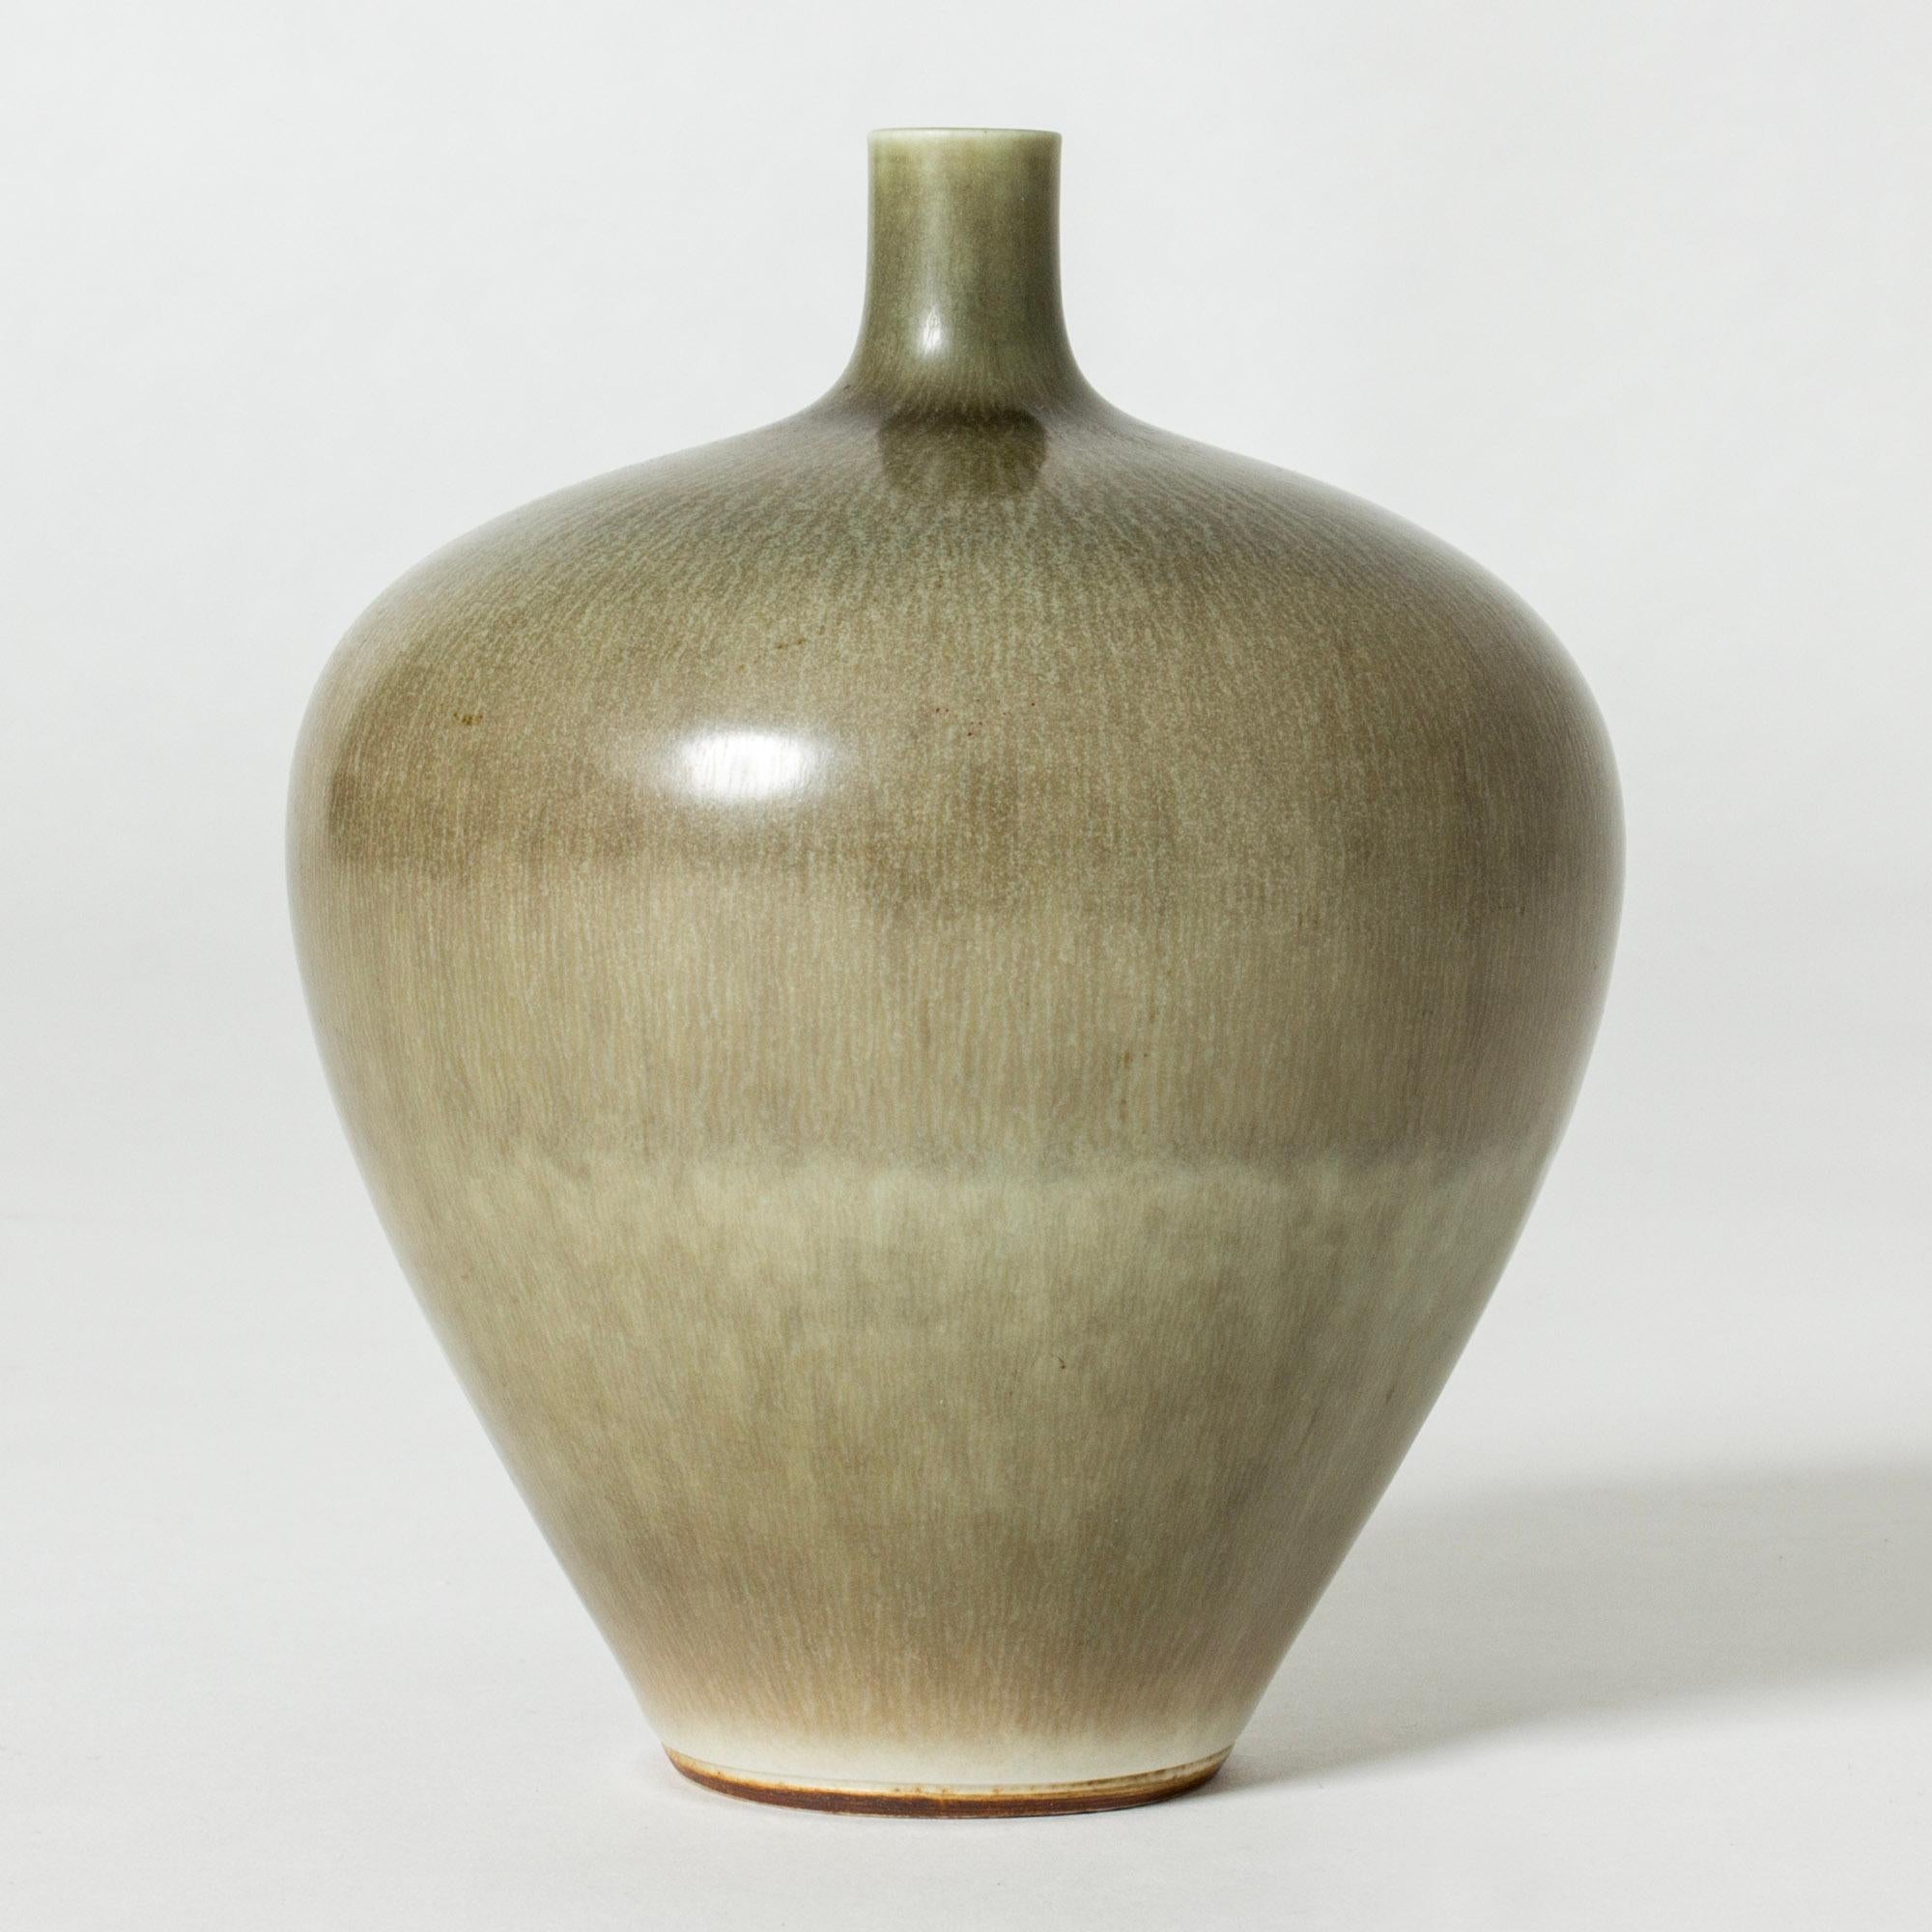 Beautiful stoneware vase by Berndt Friberg, in an elegant apple form. Hare’s fur glaze in shifting mole colored nuances.

Berndt Friberg was a Swedish ceramicist, renowned for his stoneware vases and vessels for Gustavsberg. His pure, composed